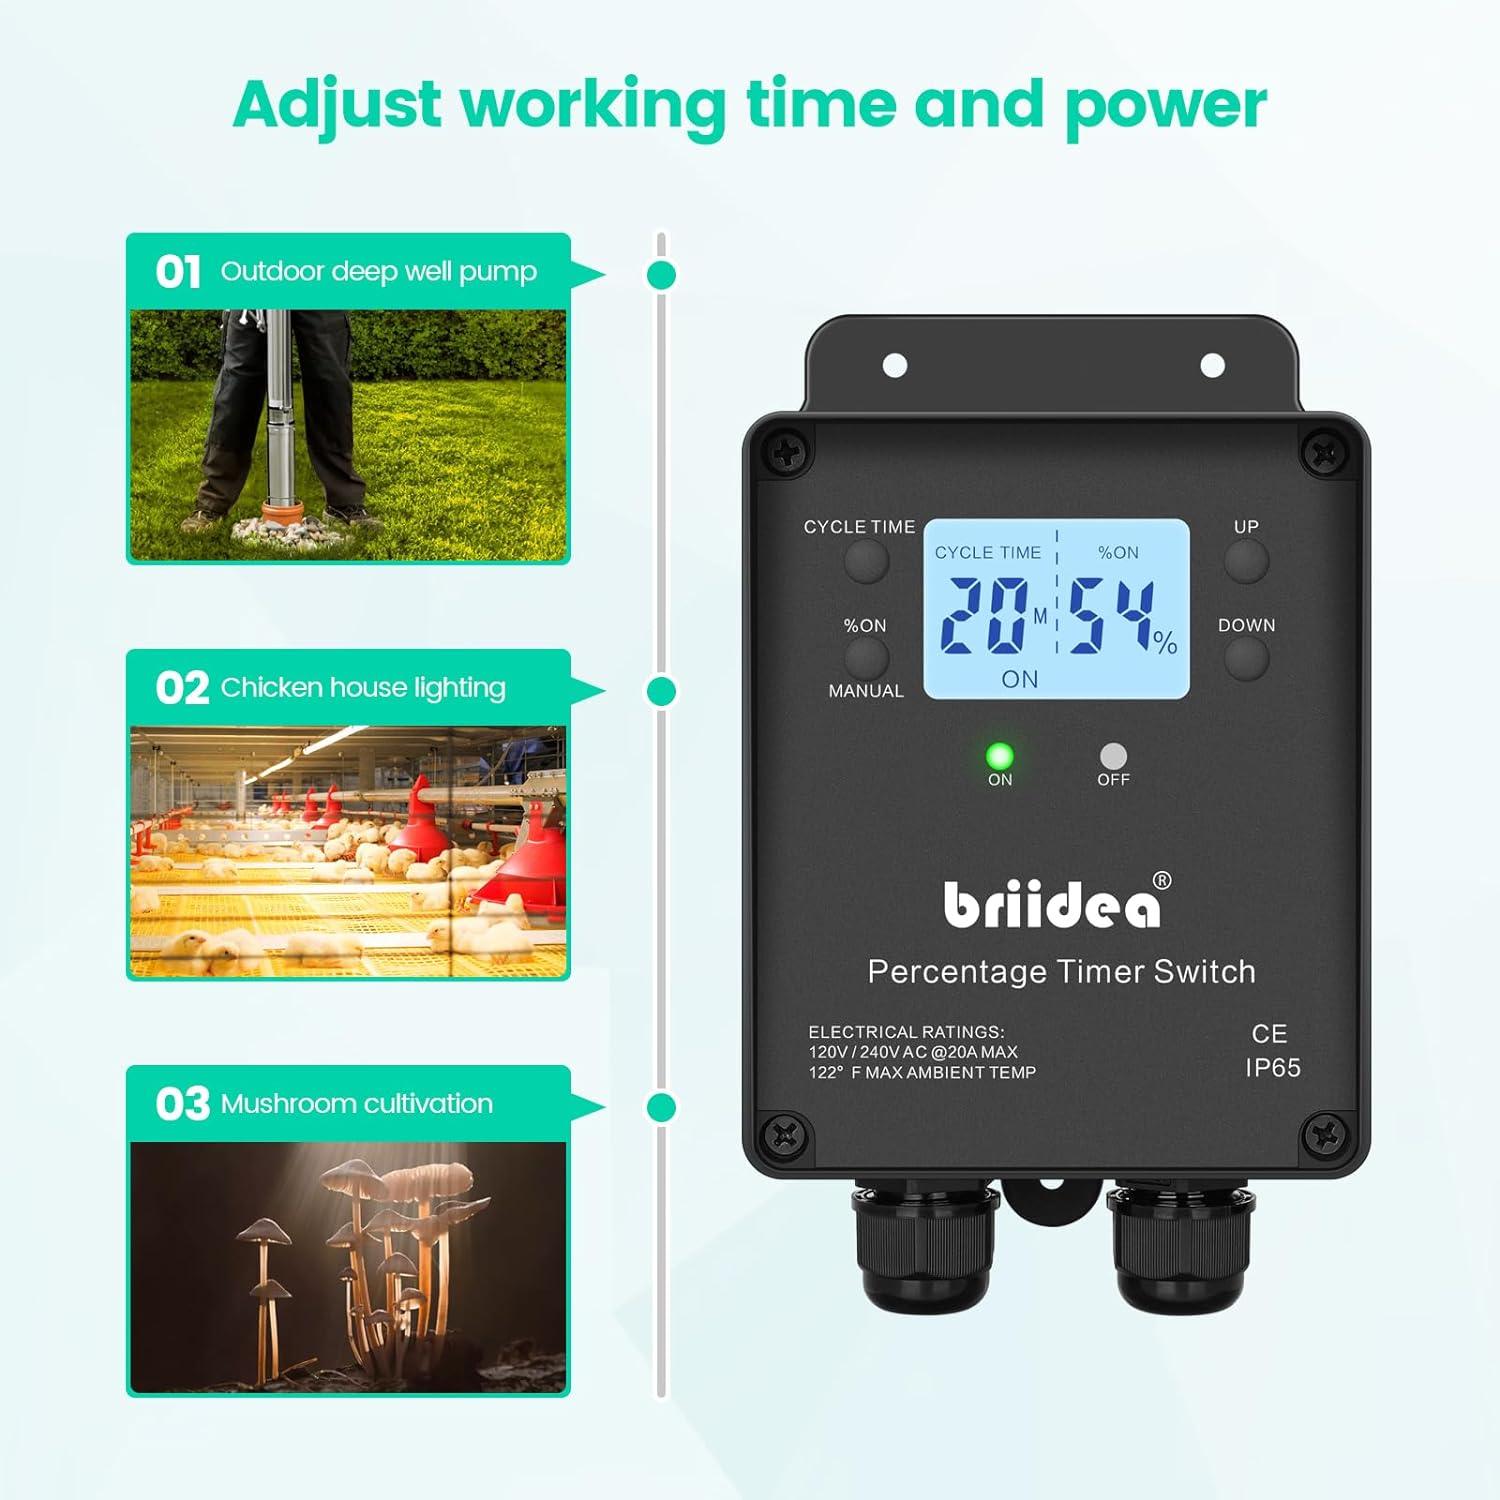 Briidea Percentage Timer Switch, Intelligent Digtal Display with White Backlighting, S/M/H Selectable Time Unit, Customizable Cycle Time Set Value, 20A Load /2 HP Motor, 120/240 VAC Input - briidea